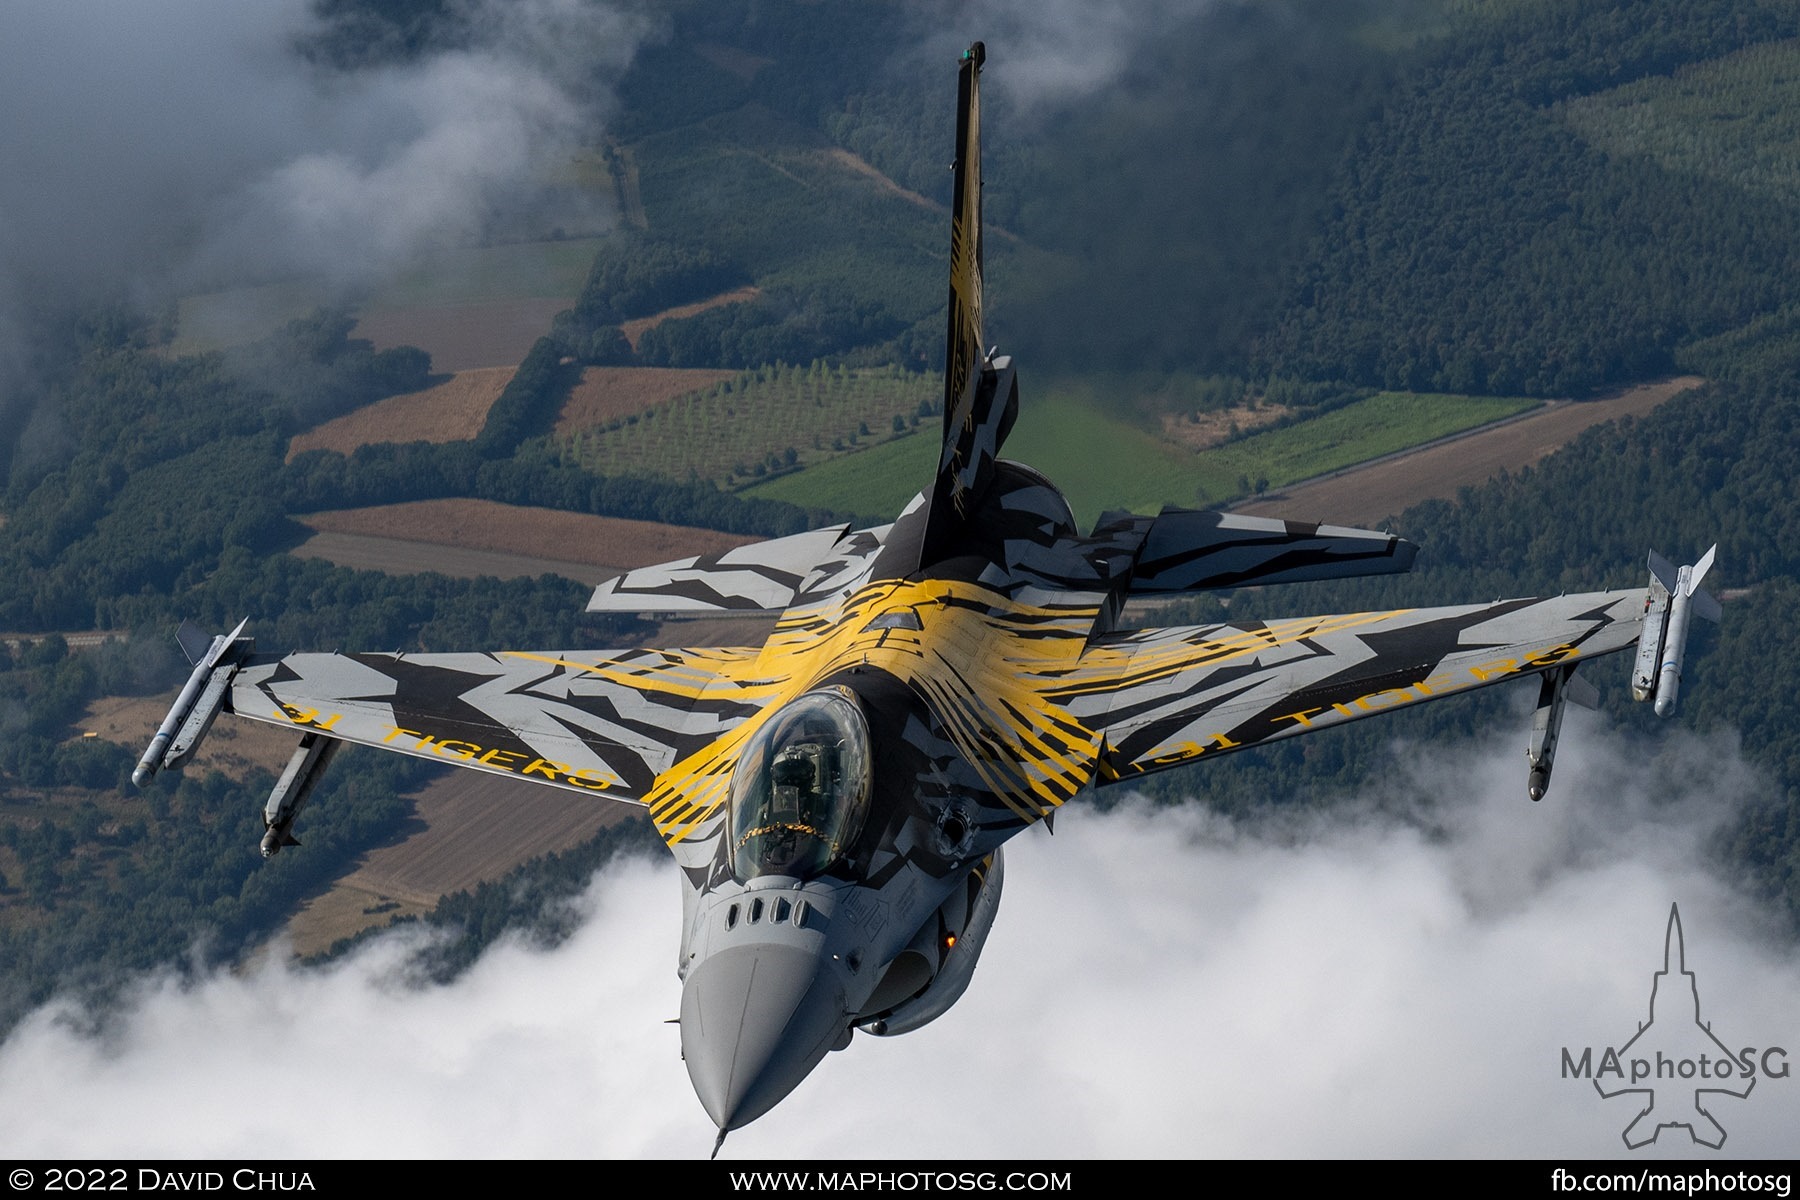 XTM X-Tiger, the special painted F-16 that celebrates 70 years of Belgian Air Component’s 31st Tiger Squadron